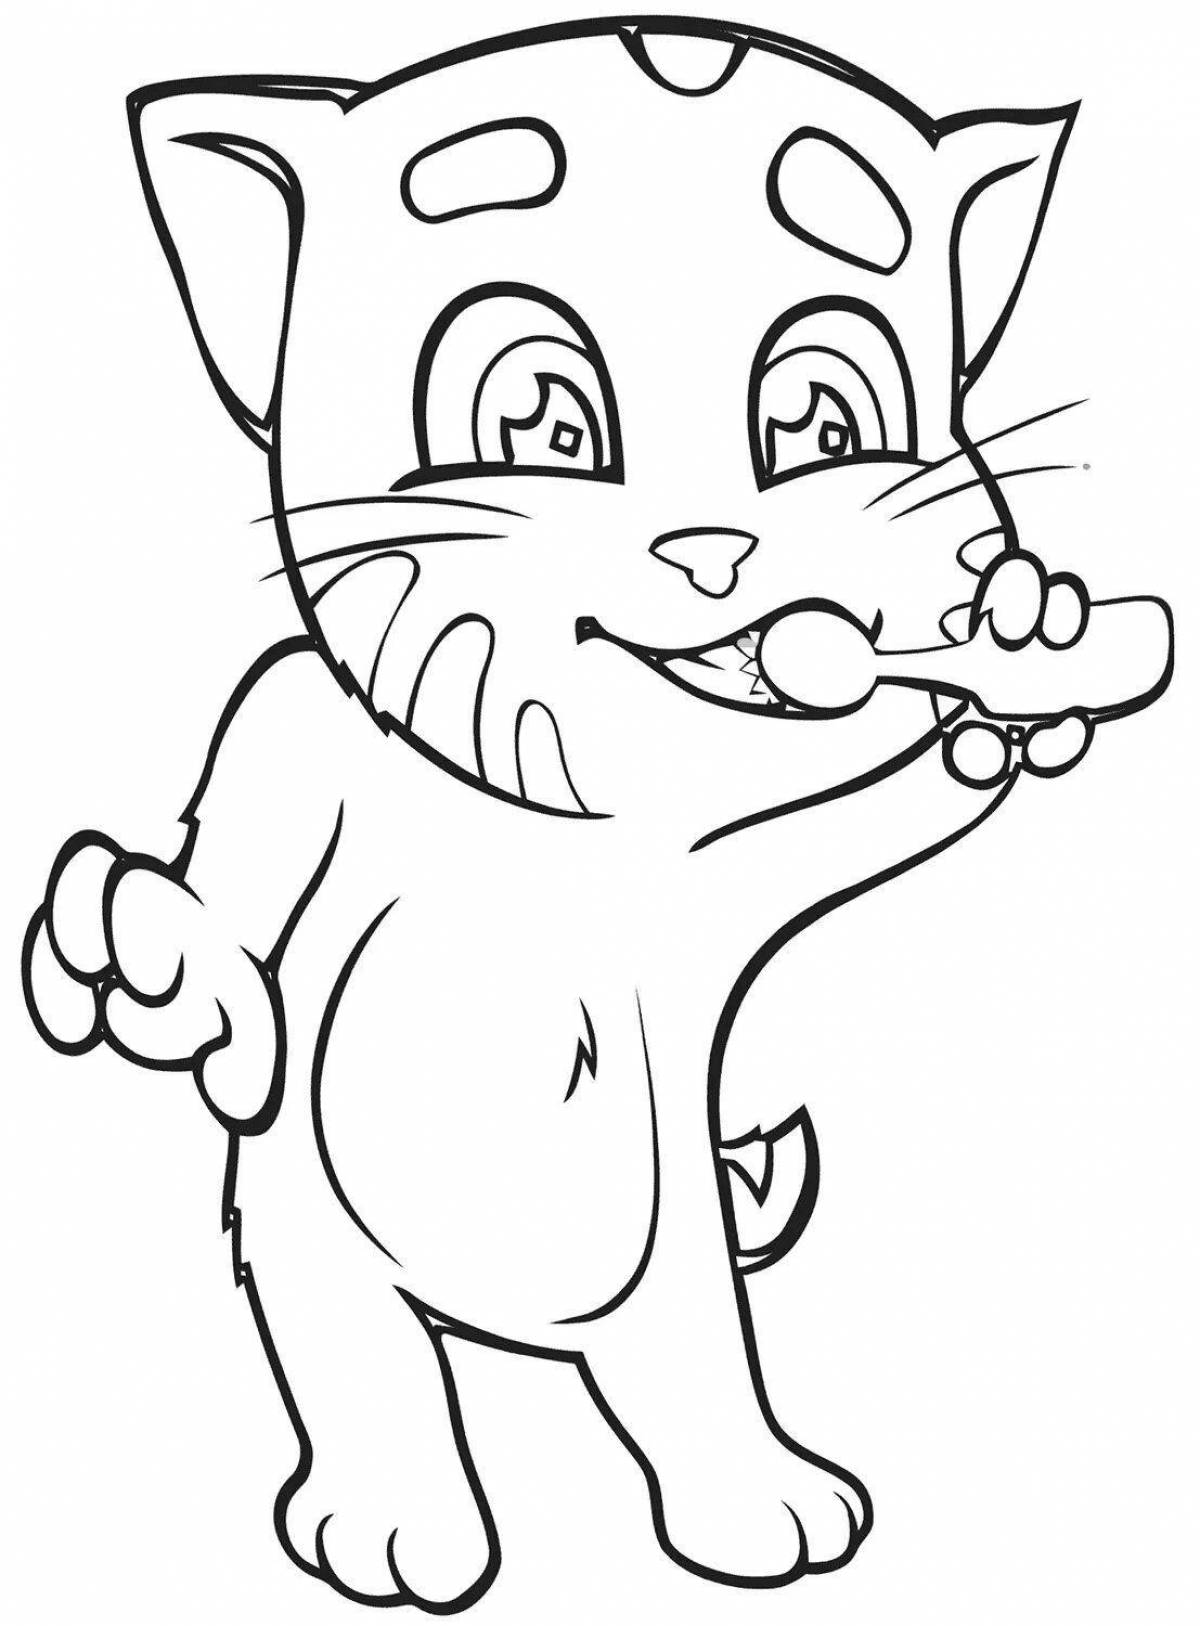 Amazing ginger coloring page